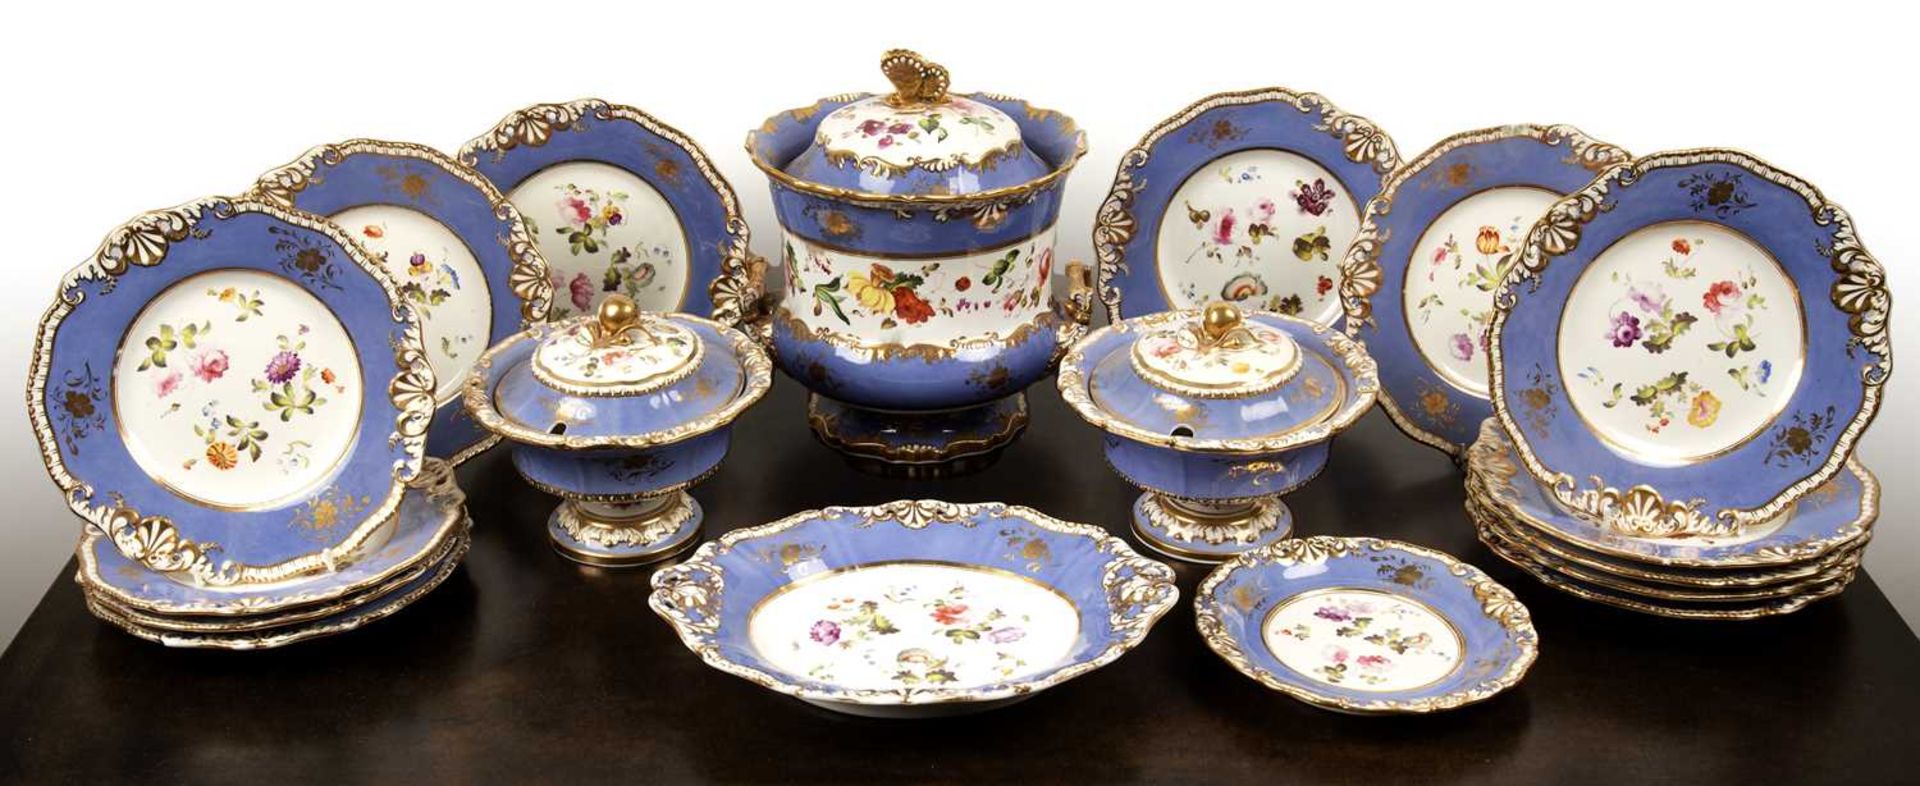 H and R Daniel part porcelain service circa 1830/1840, painted with flower sprays, within pale